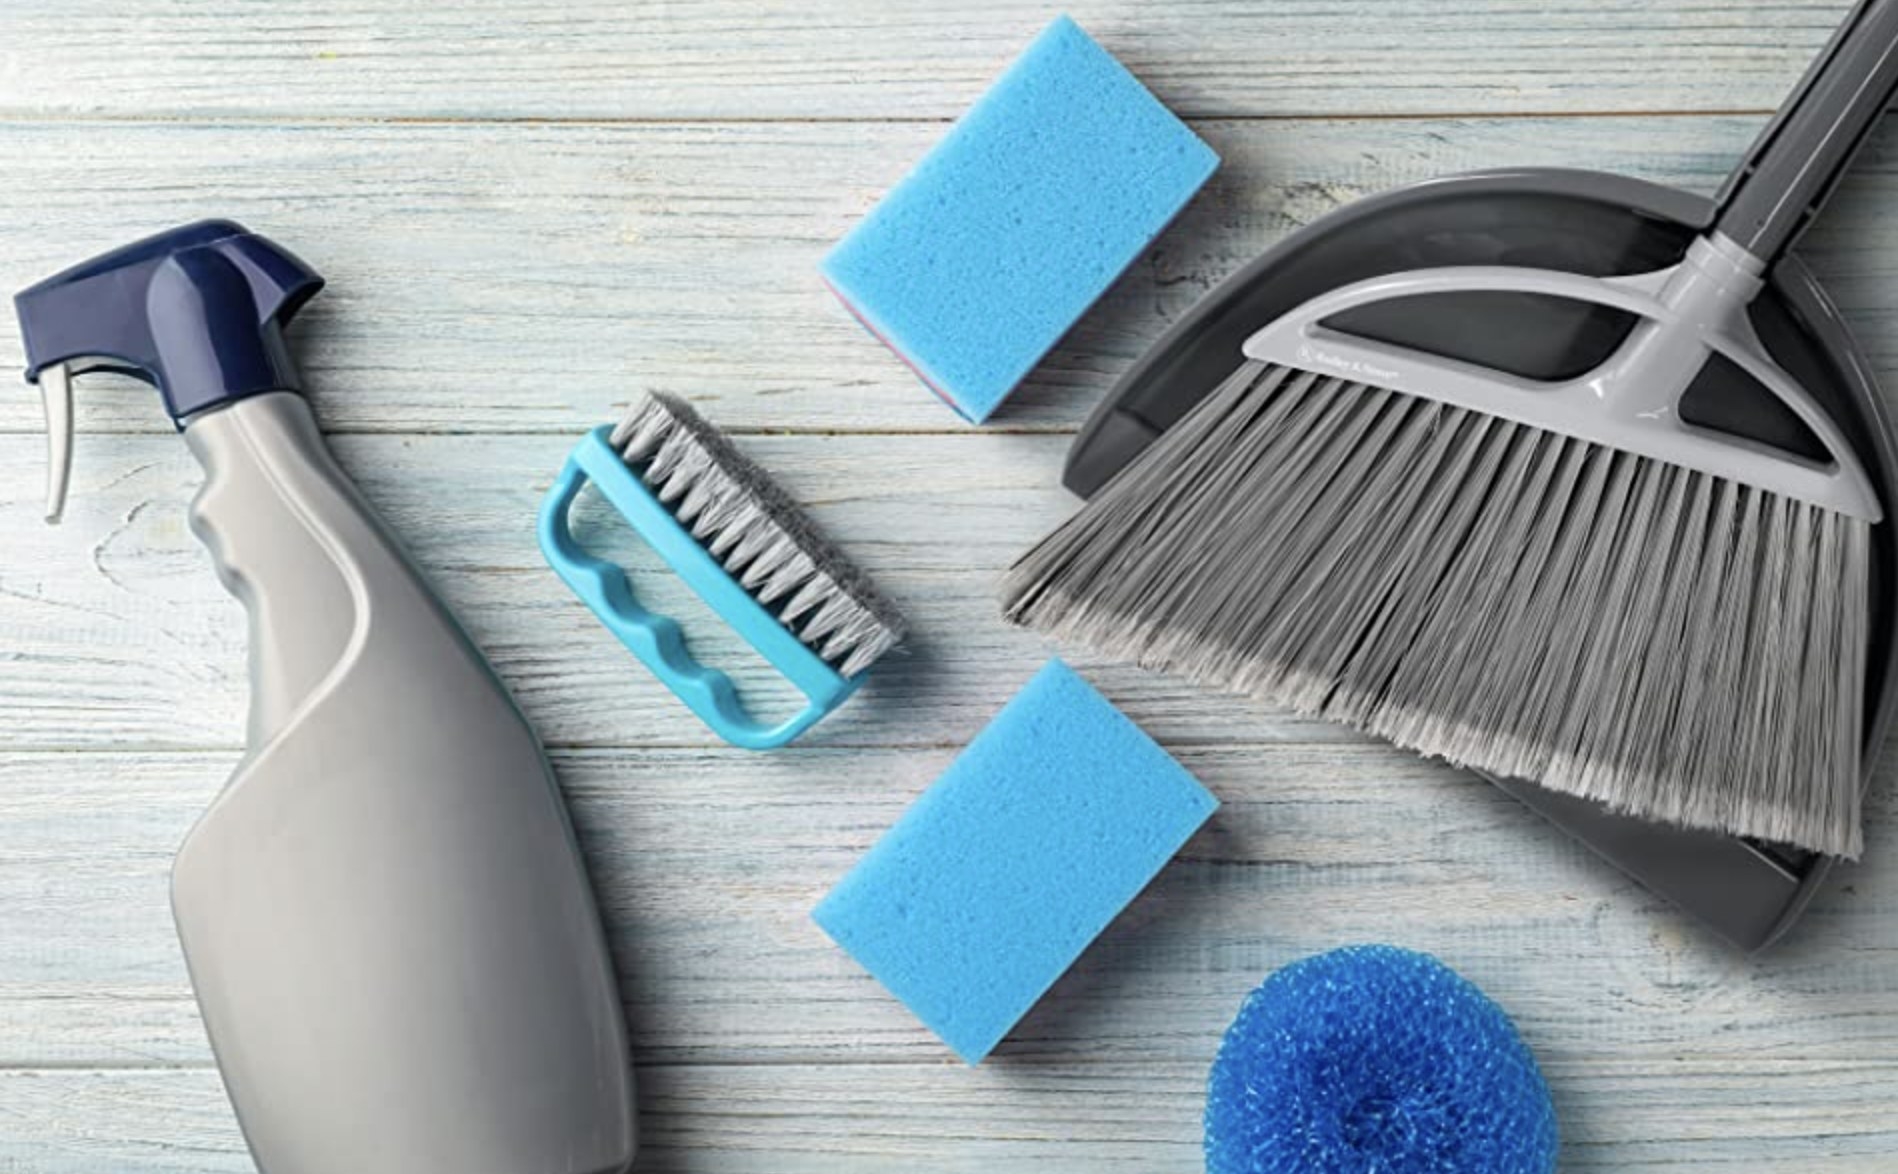 The grey broom and dustpan shown with other cleaning supplies